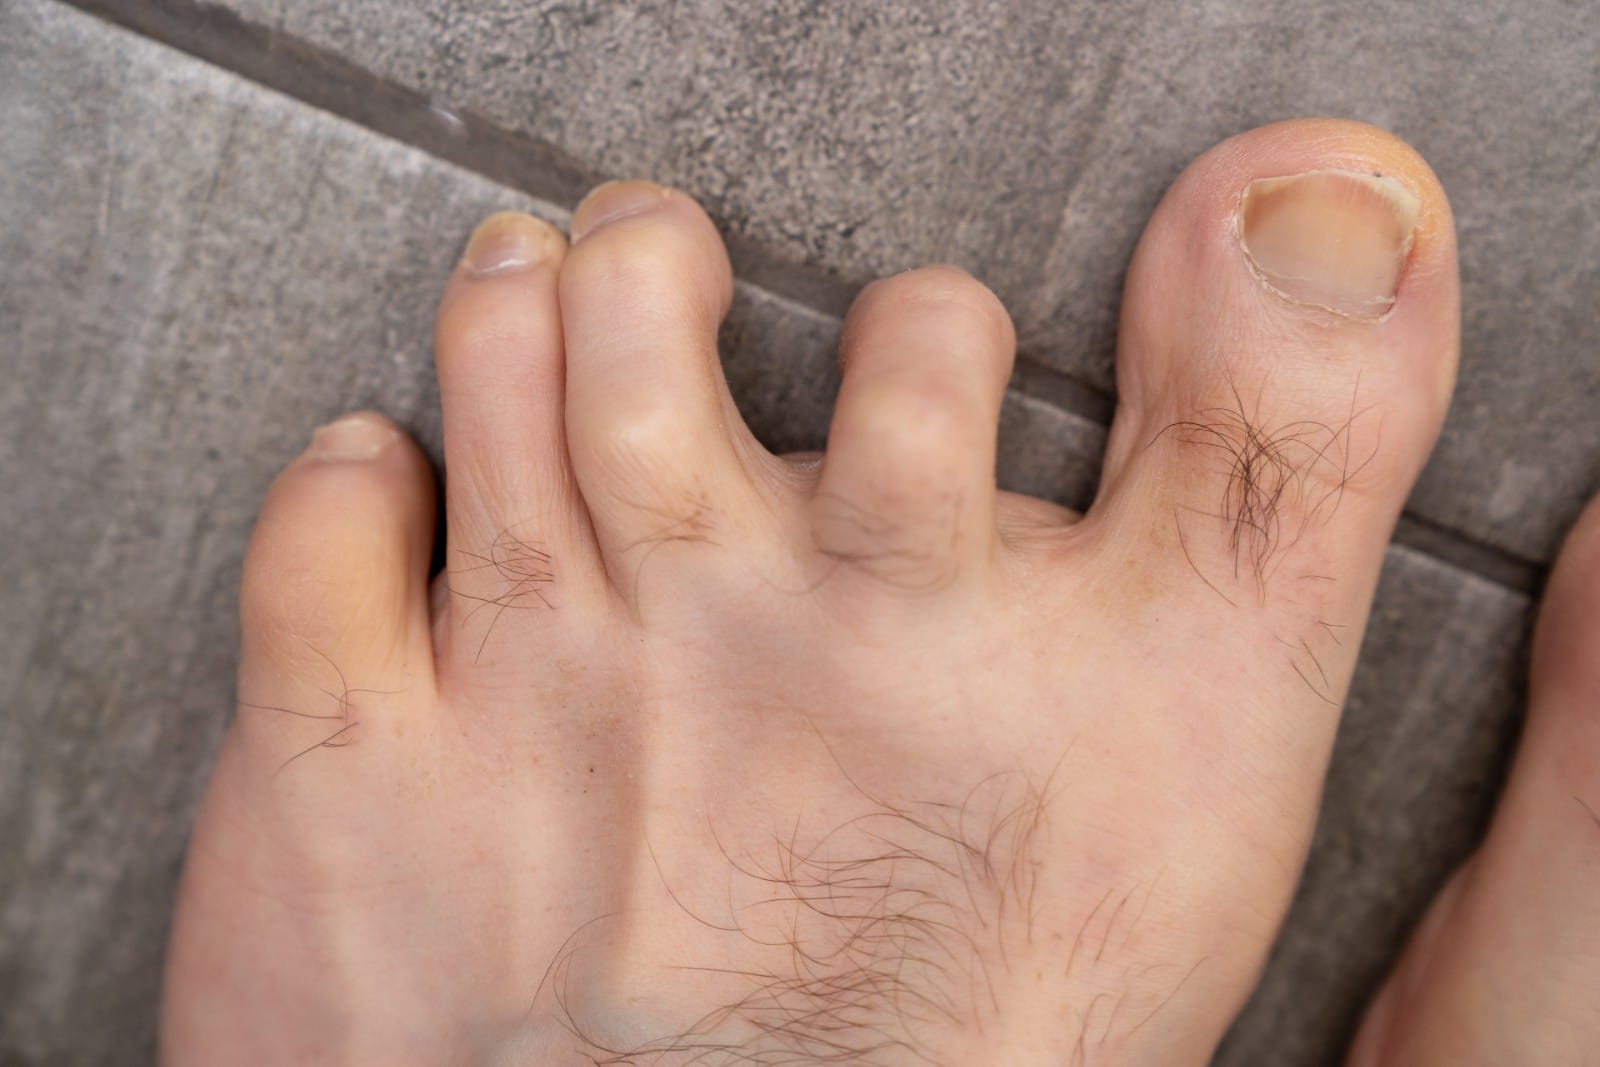 a foot with a hammertoe condition